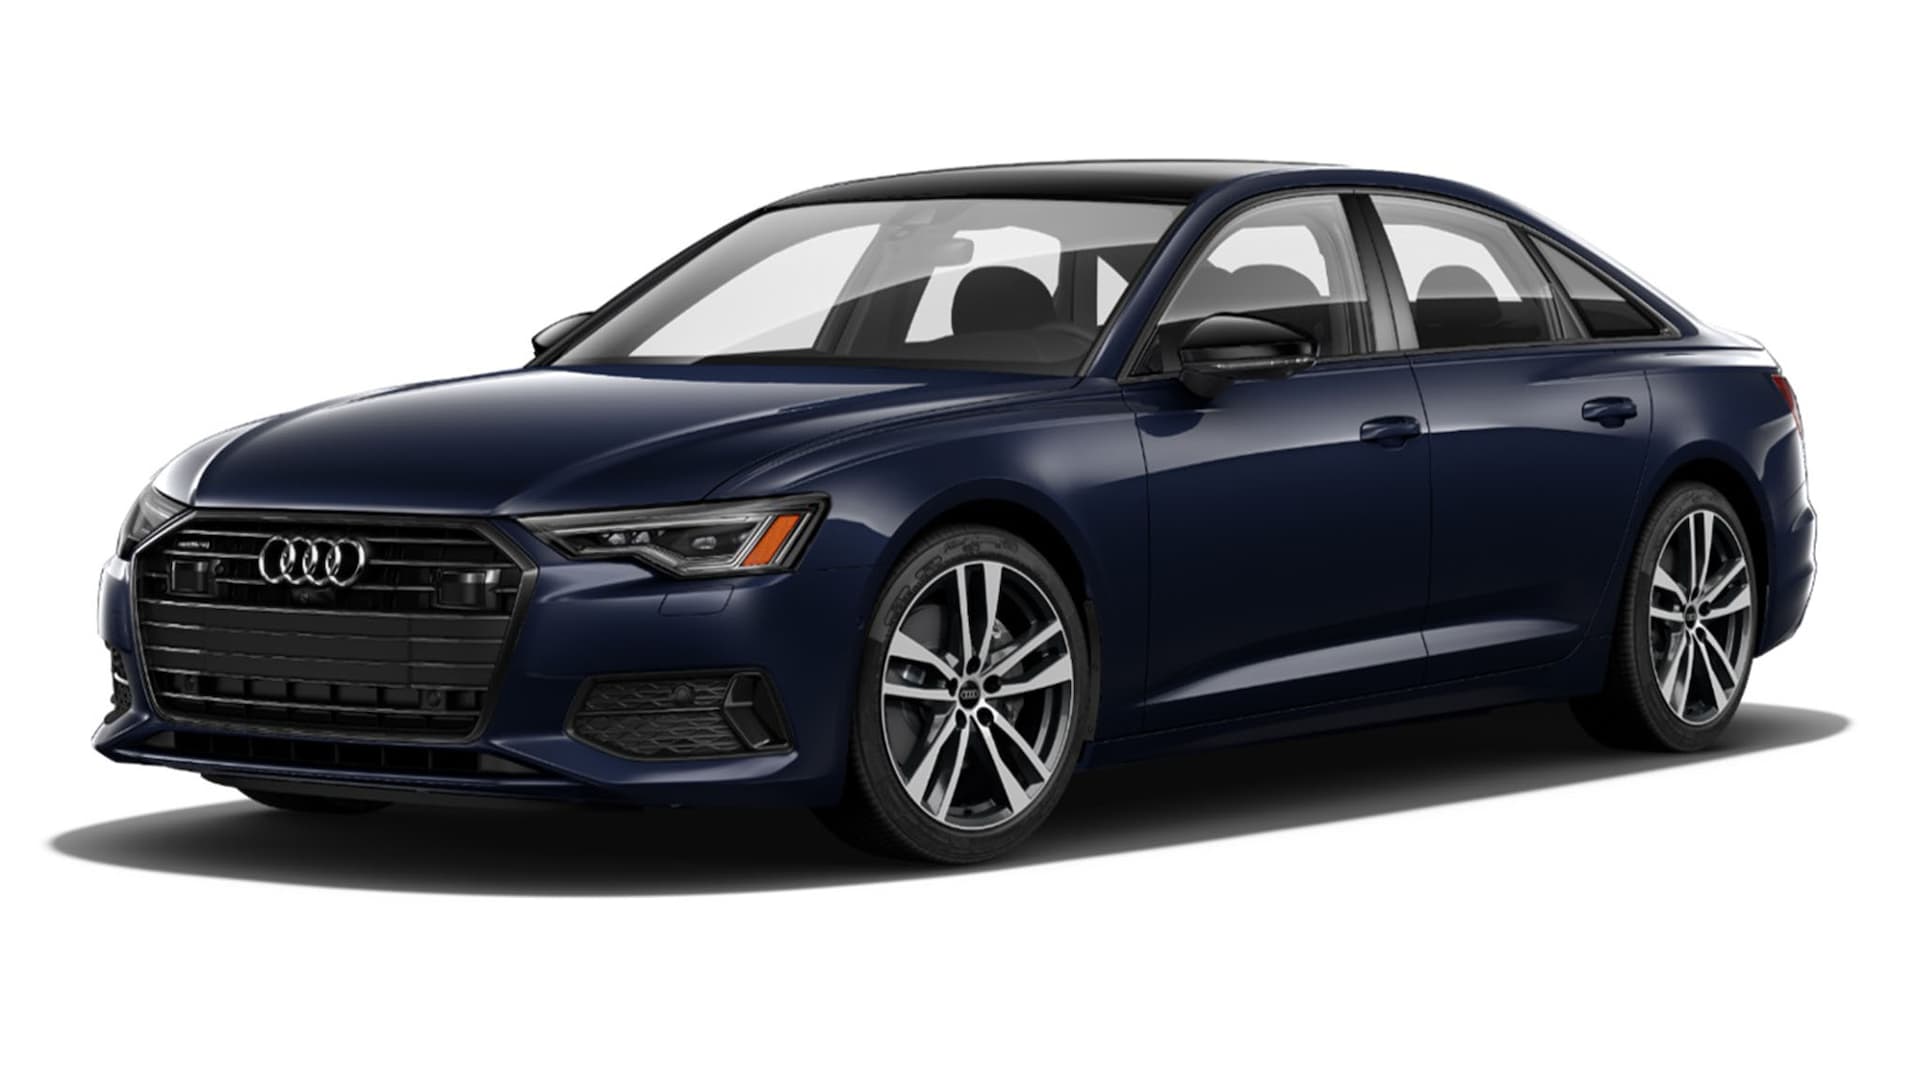 2021 Audi A6 Gets More Standard Power and a Sportier Look